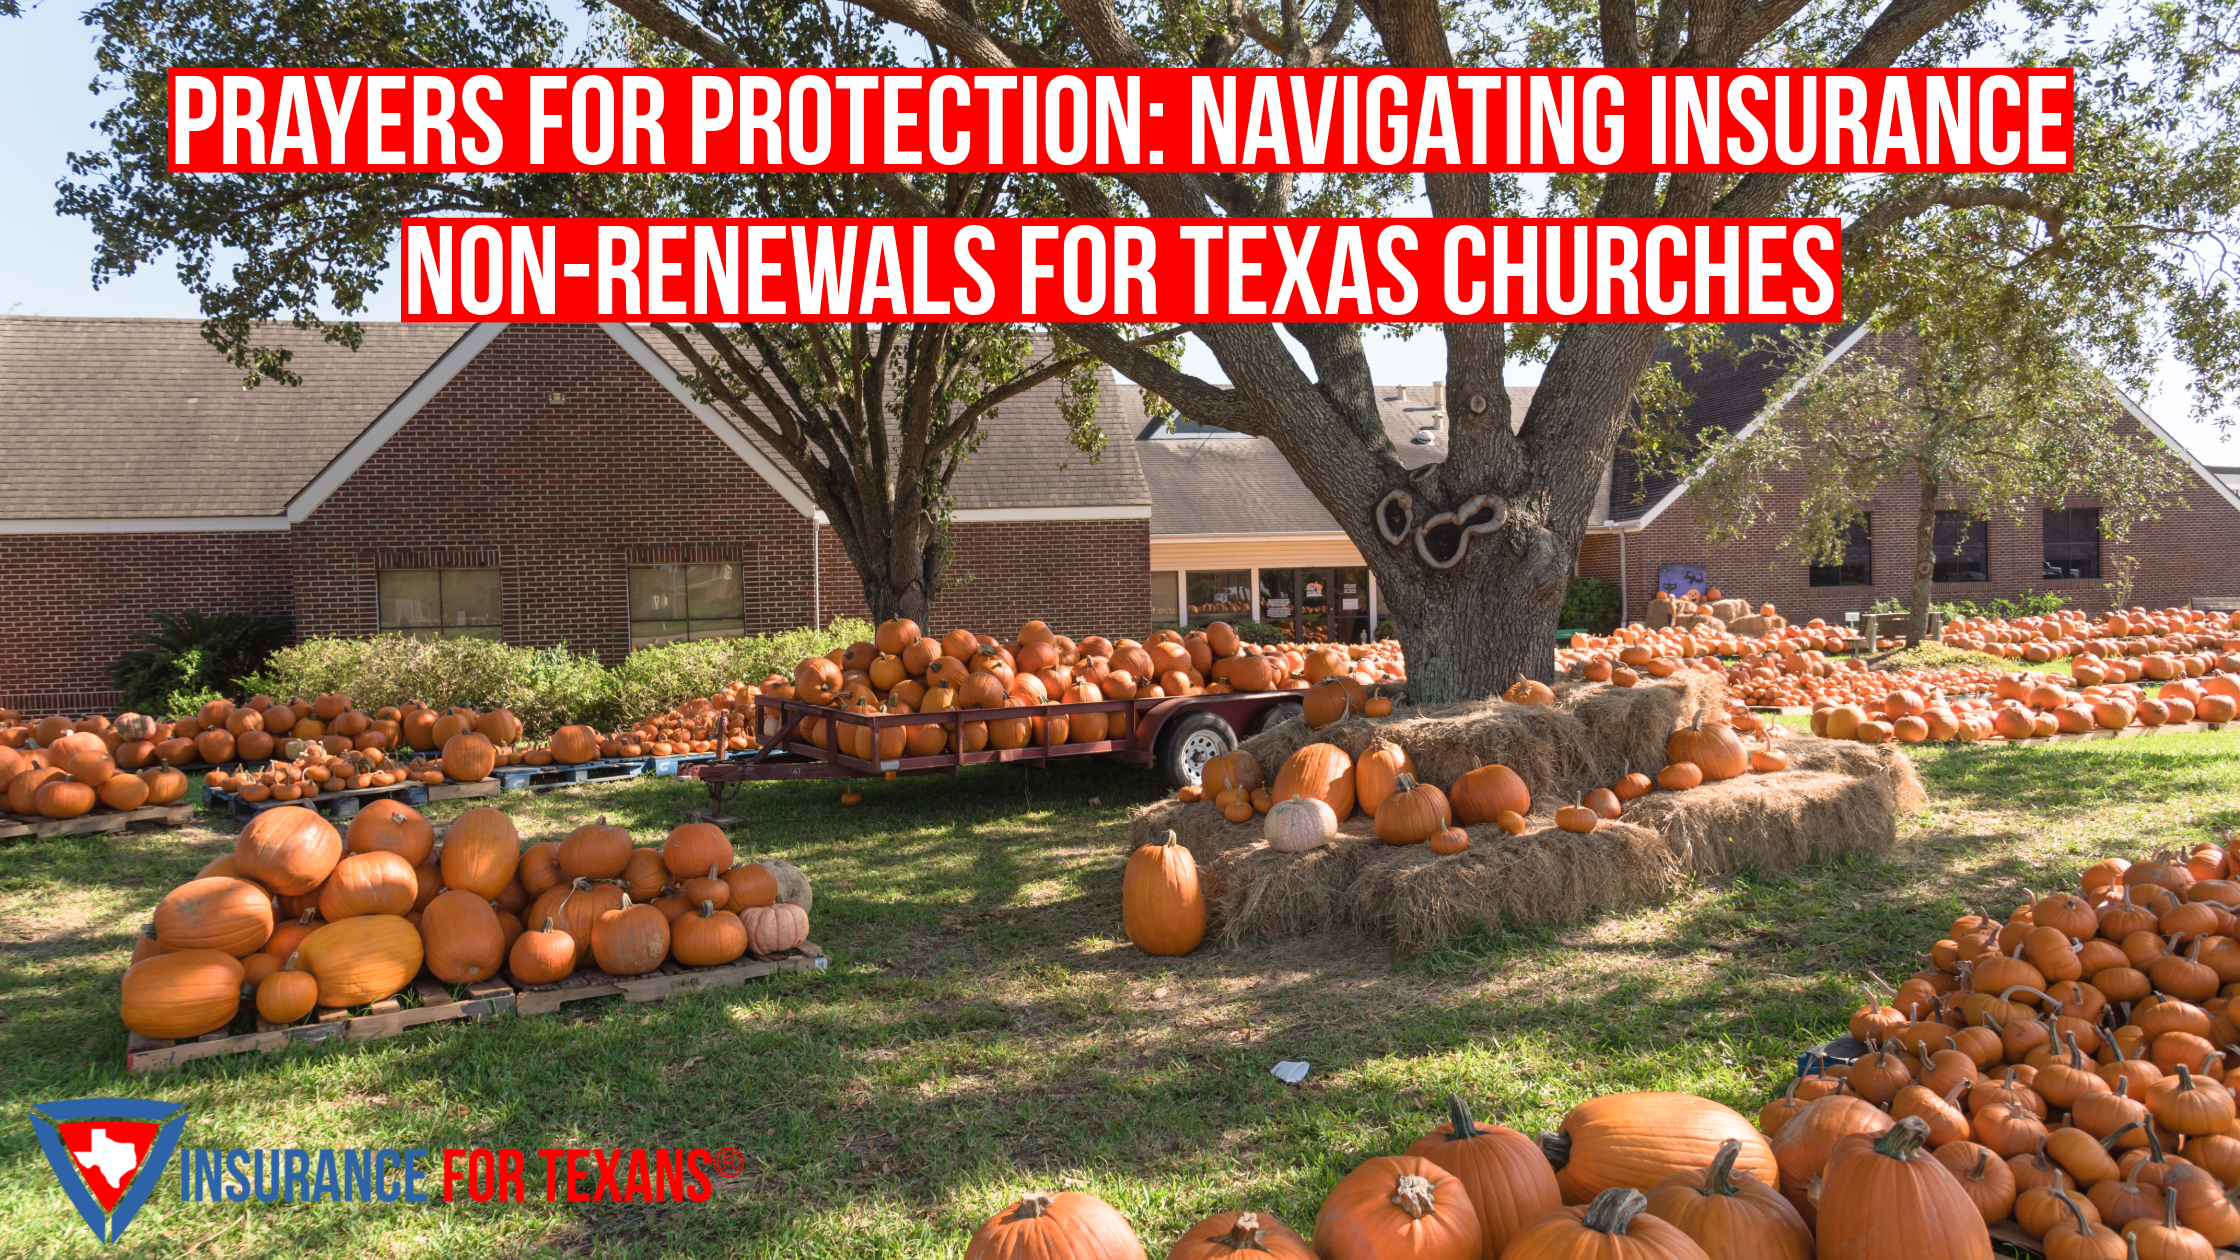 Prayers for Protection: Navigating Insurance Non-Renewals for Texas Churches